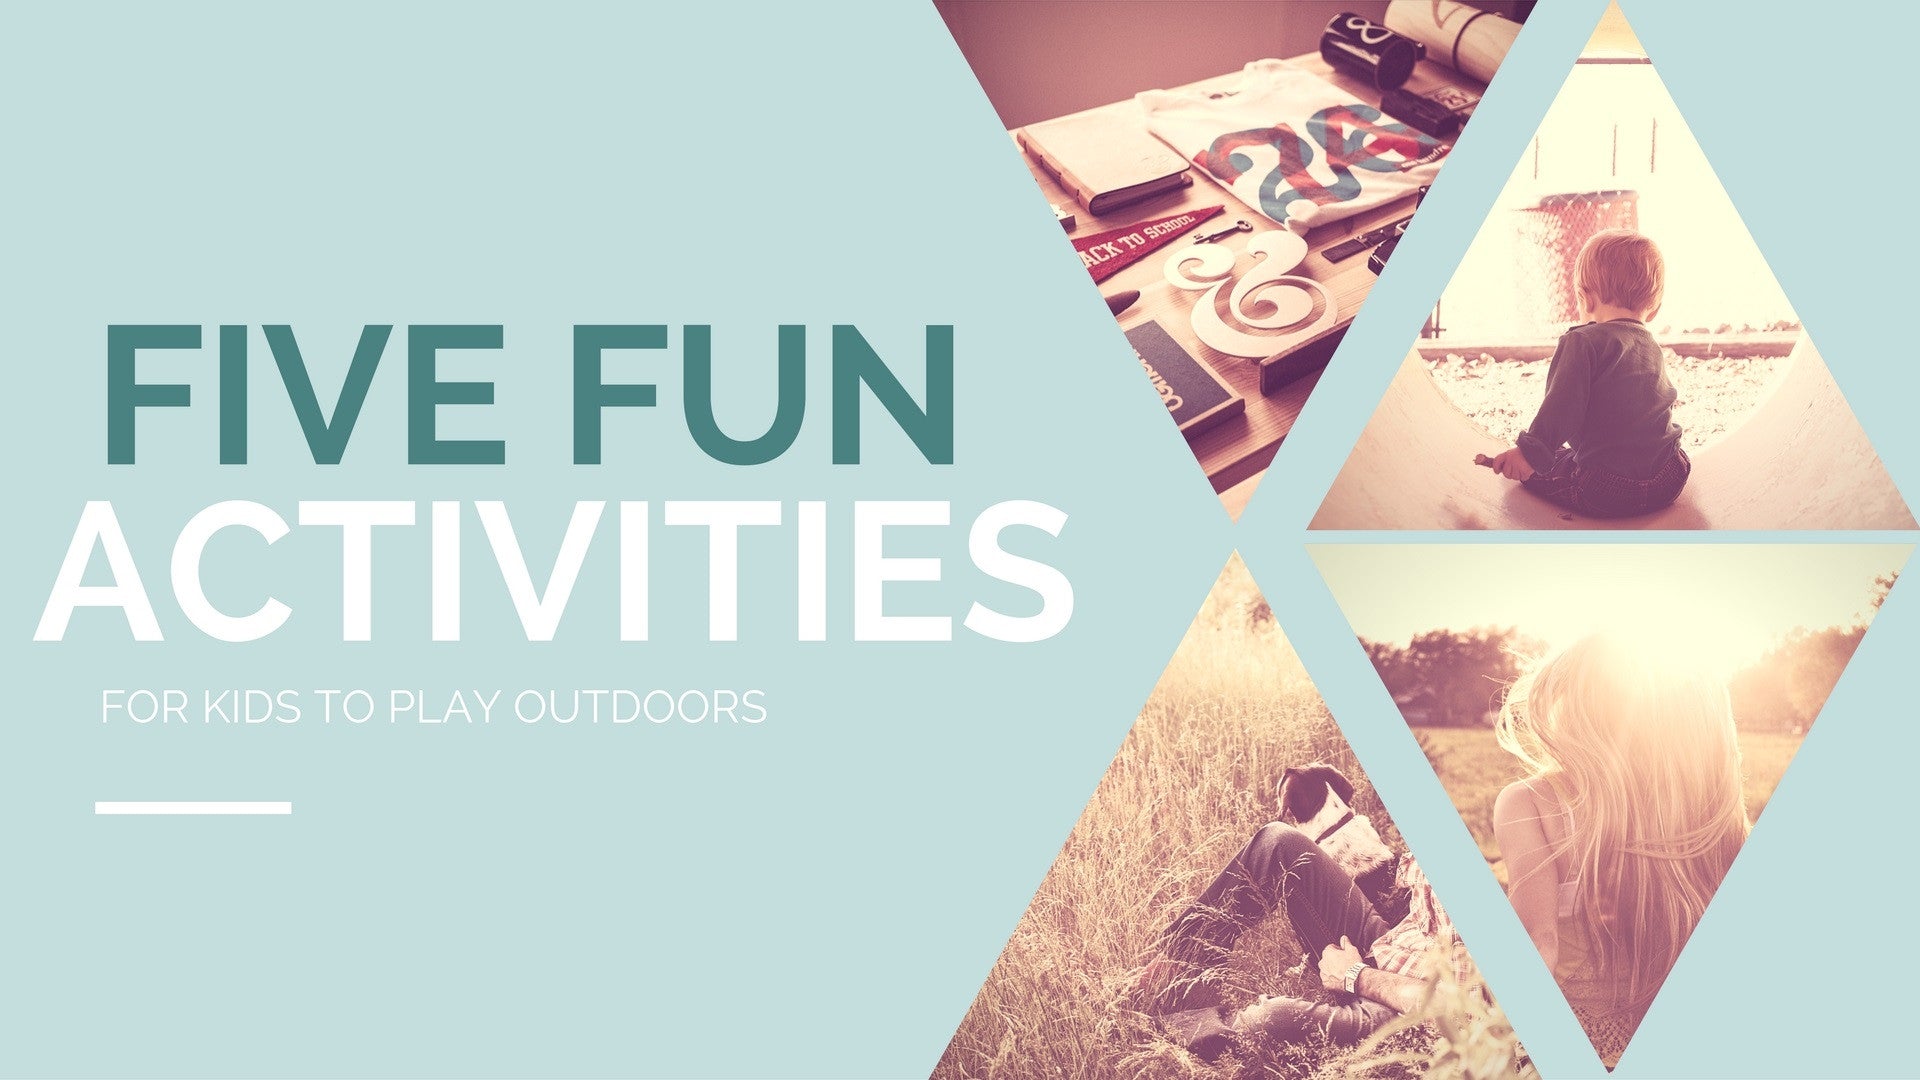 5 Fun Activities To Play With Your Kids While Camping